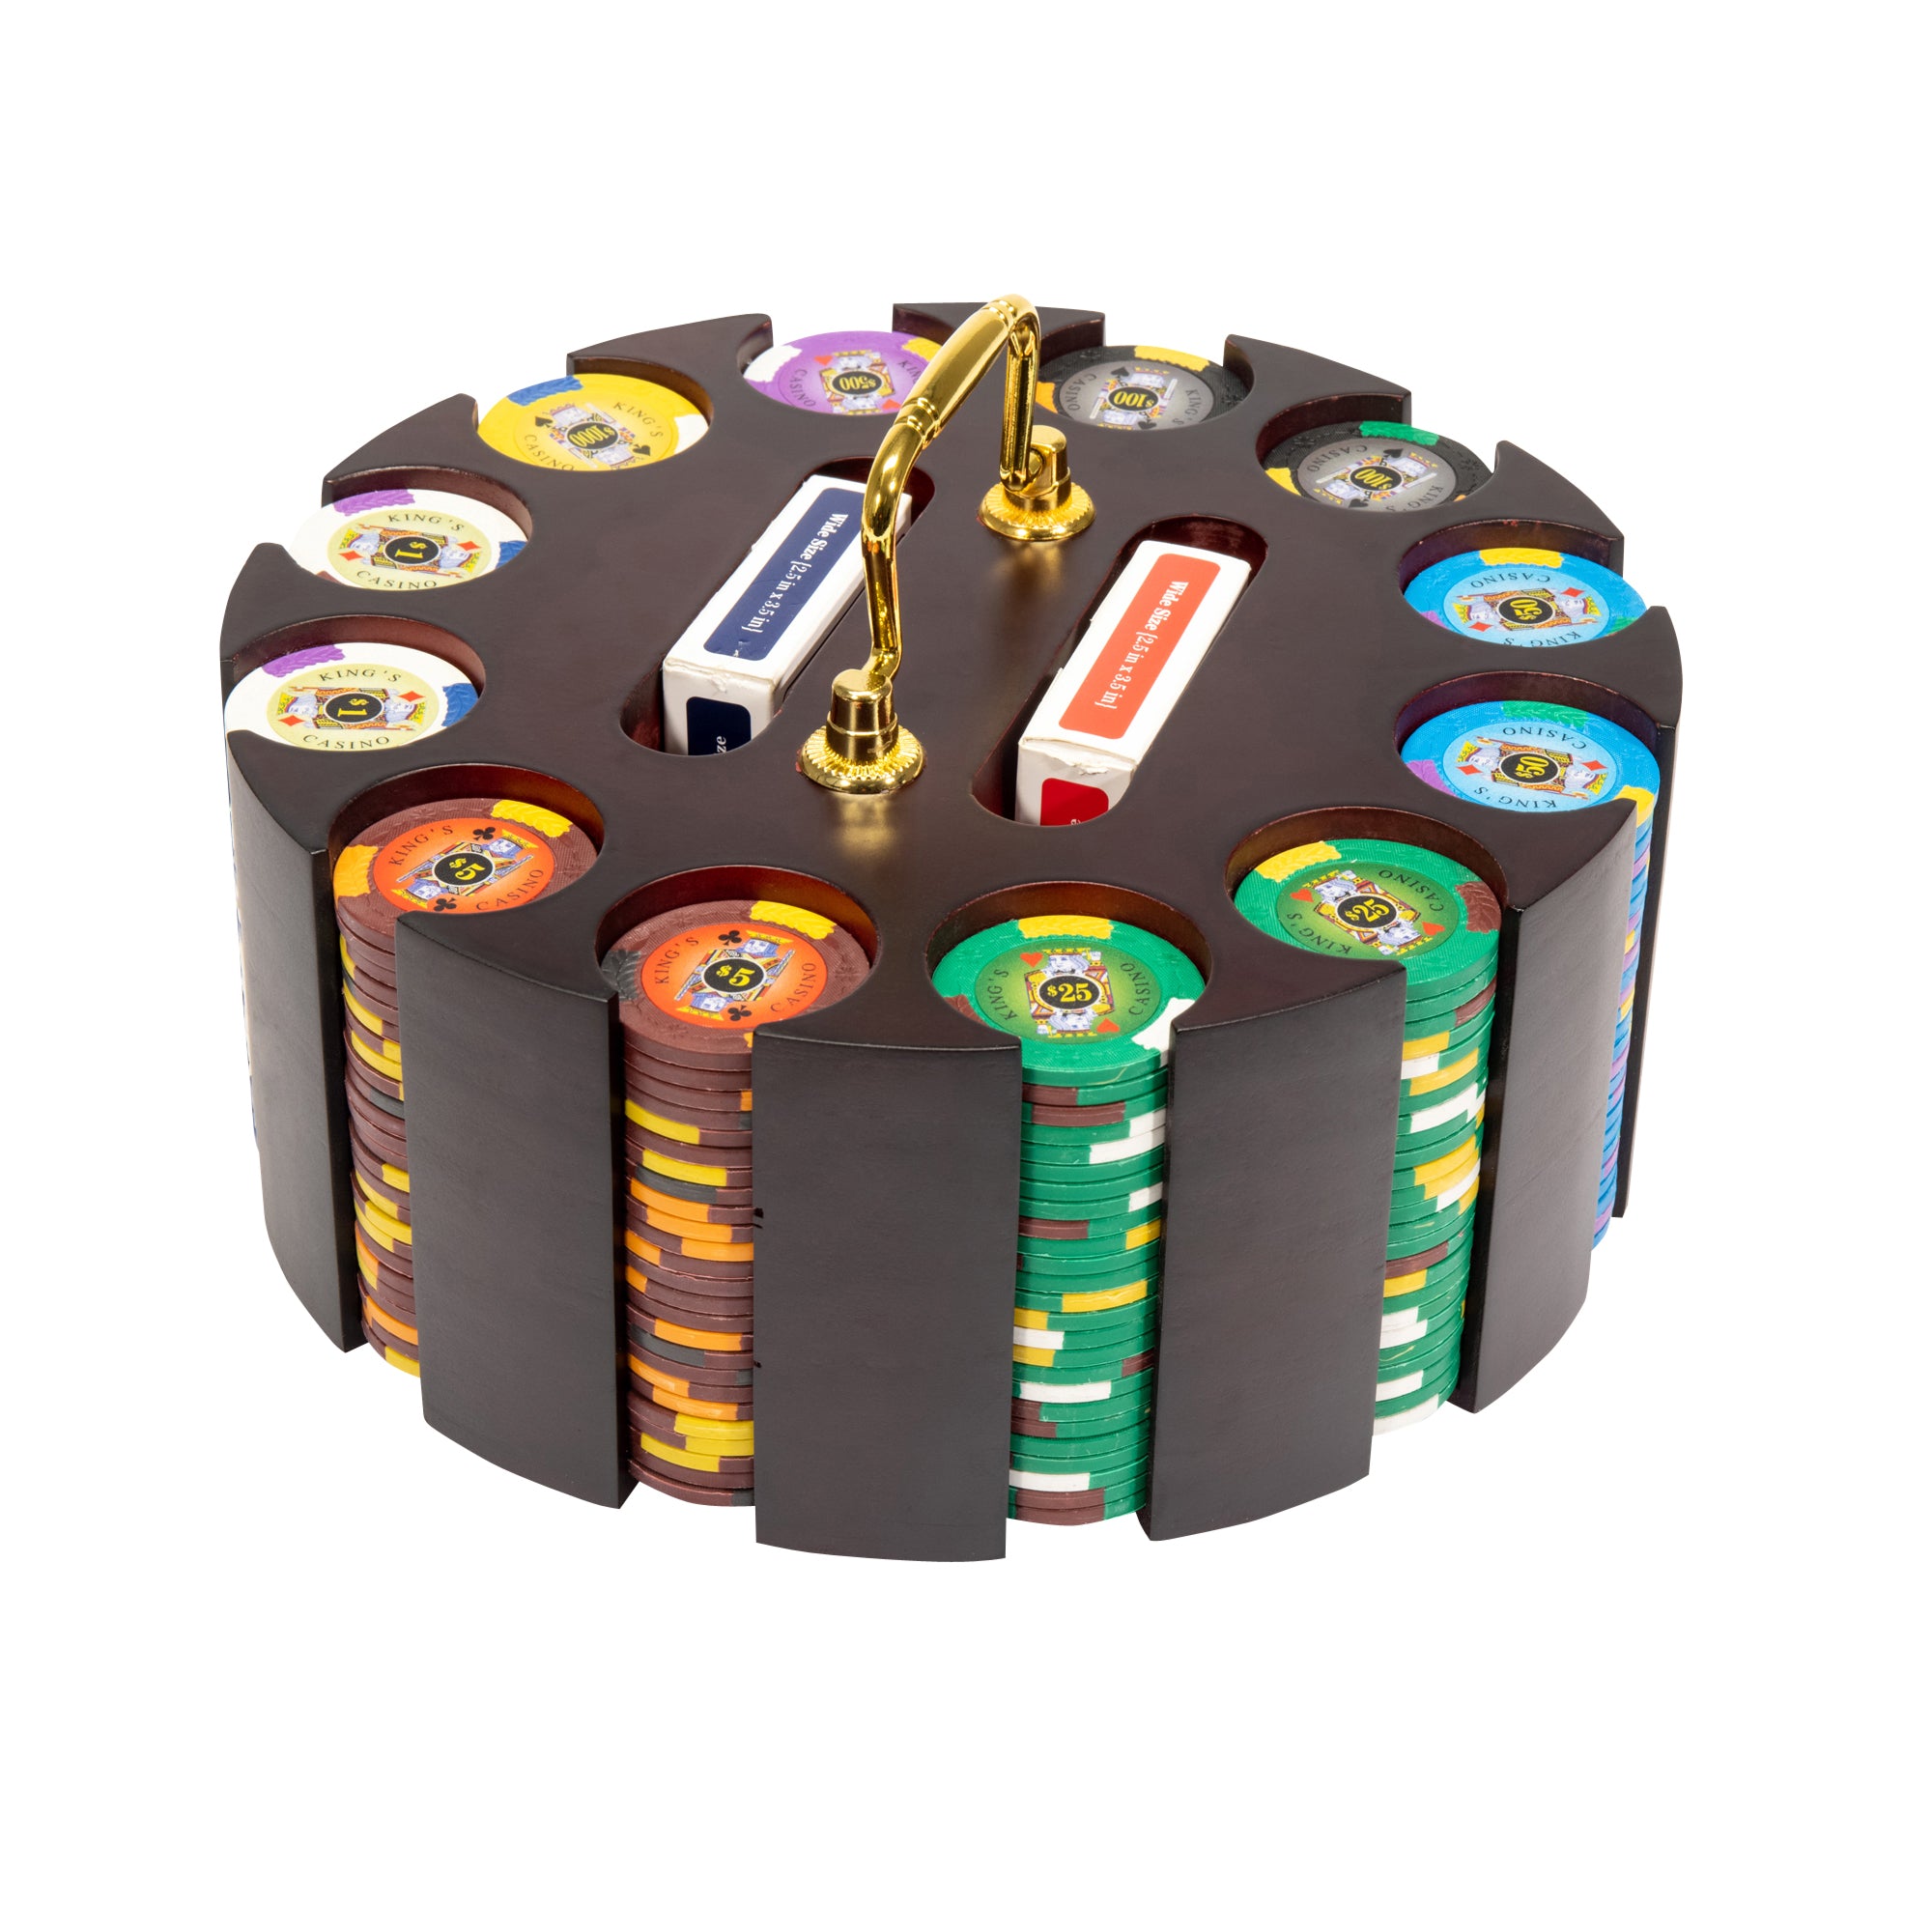 King's Casino 14-gram Poker Chip Set in Wooden Carousel (300 Count) - Clay Composite